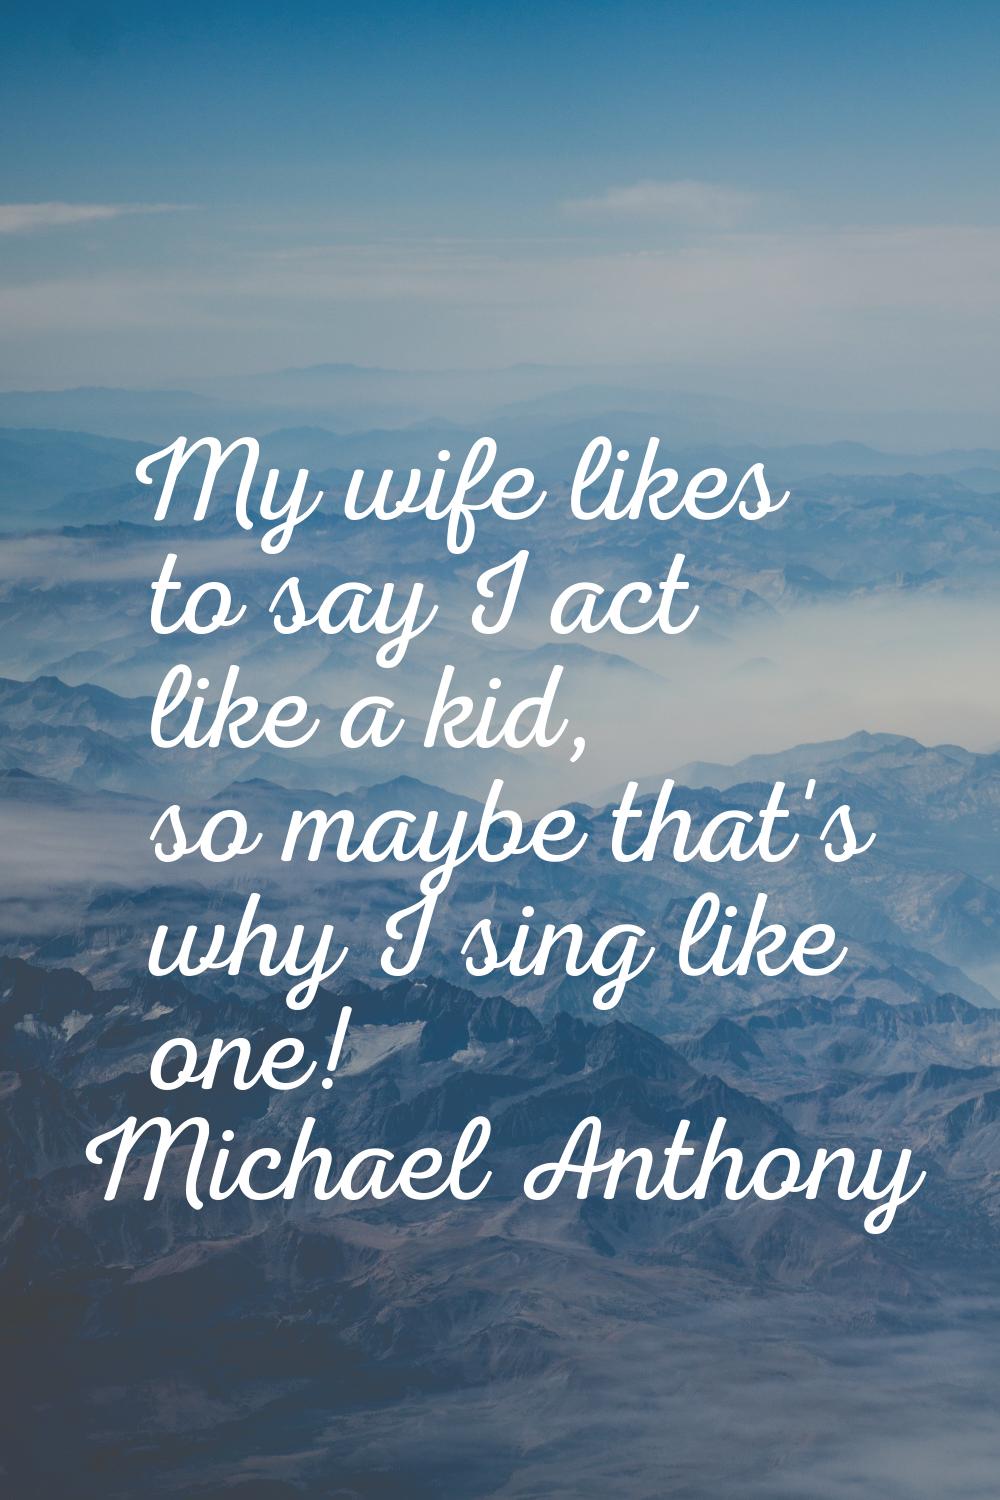 My wife likes to say I act like a kid, so maybe that's why I sing like one!